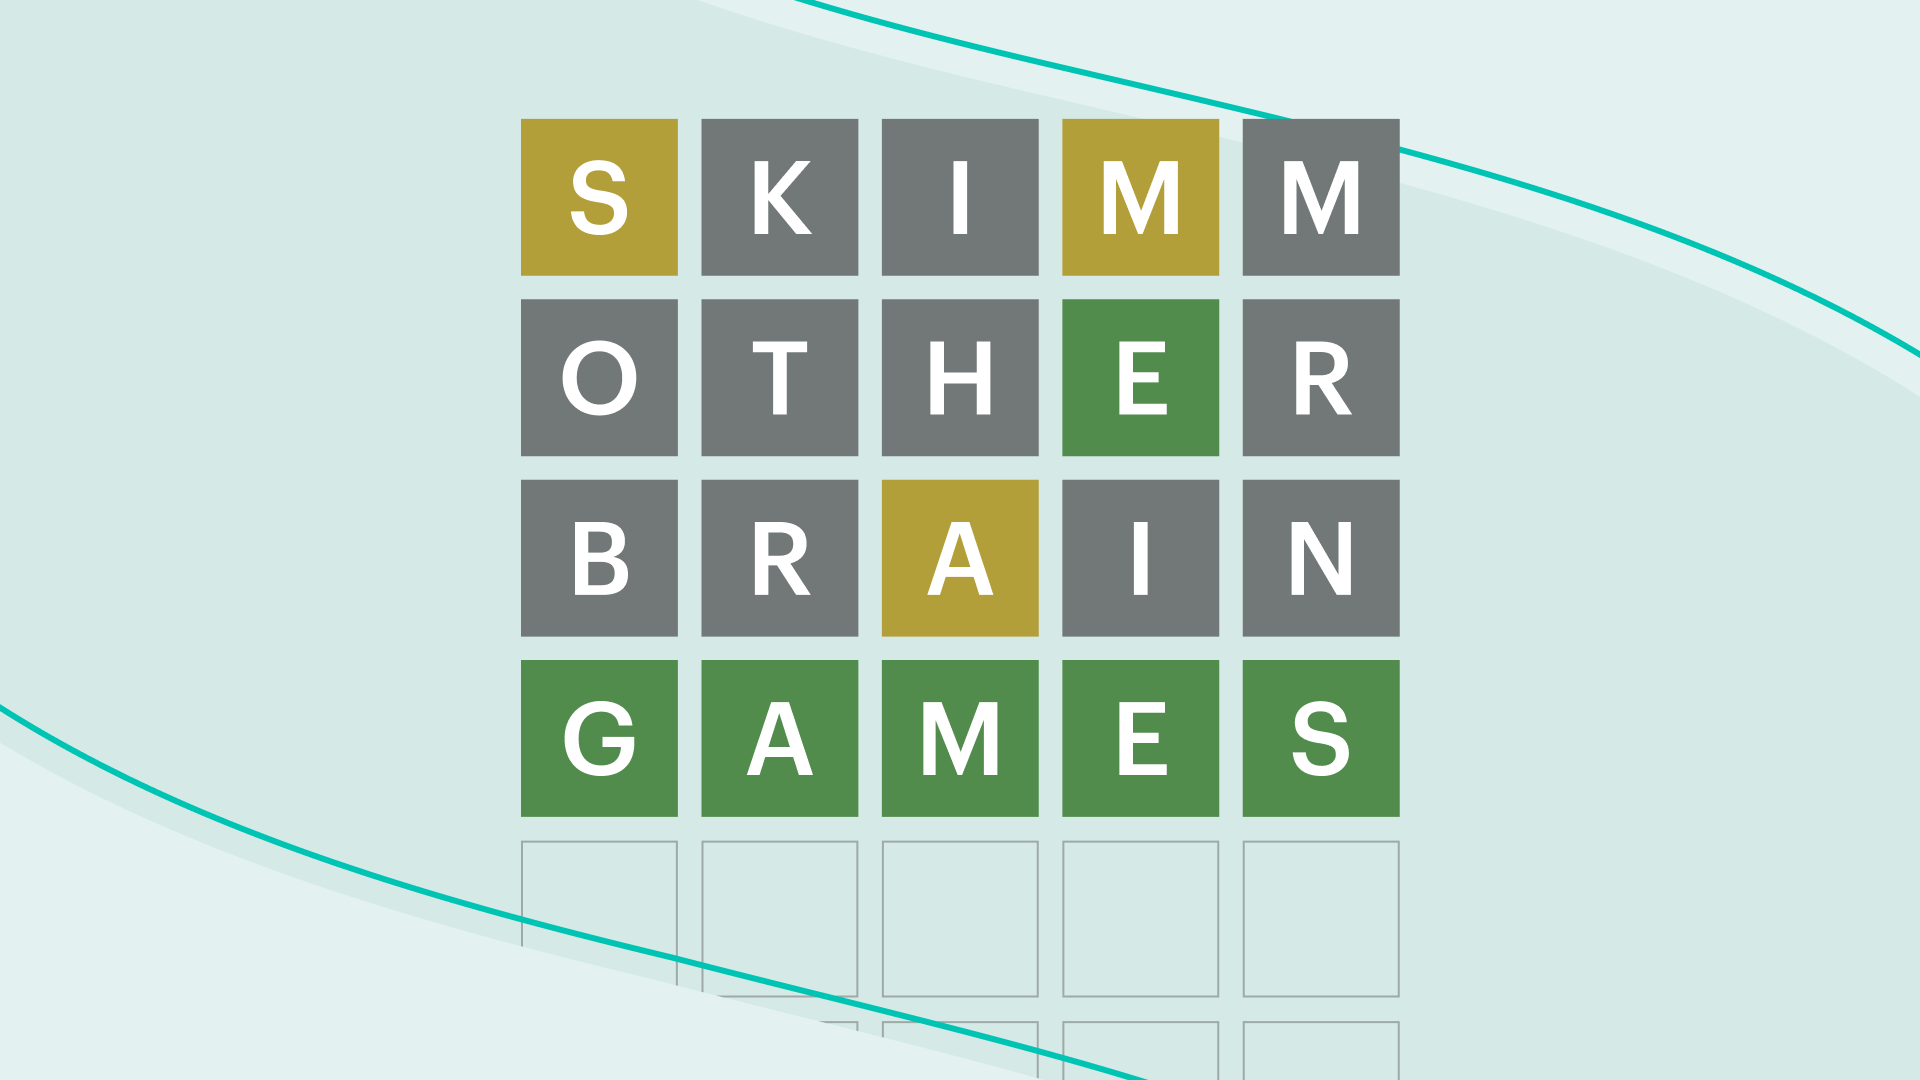 A solved Wordle puzzle that says "Skimm Other Brain Games"